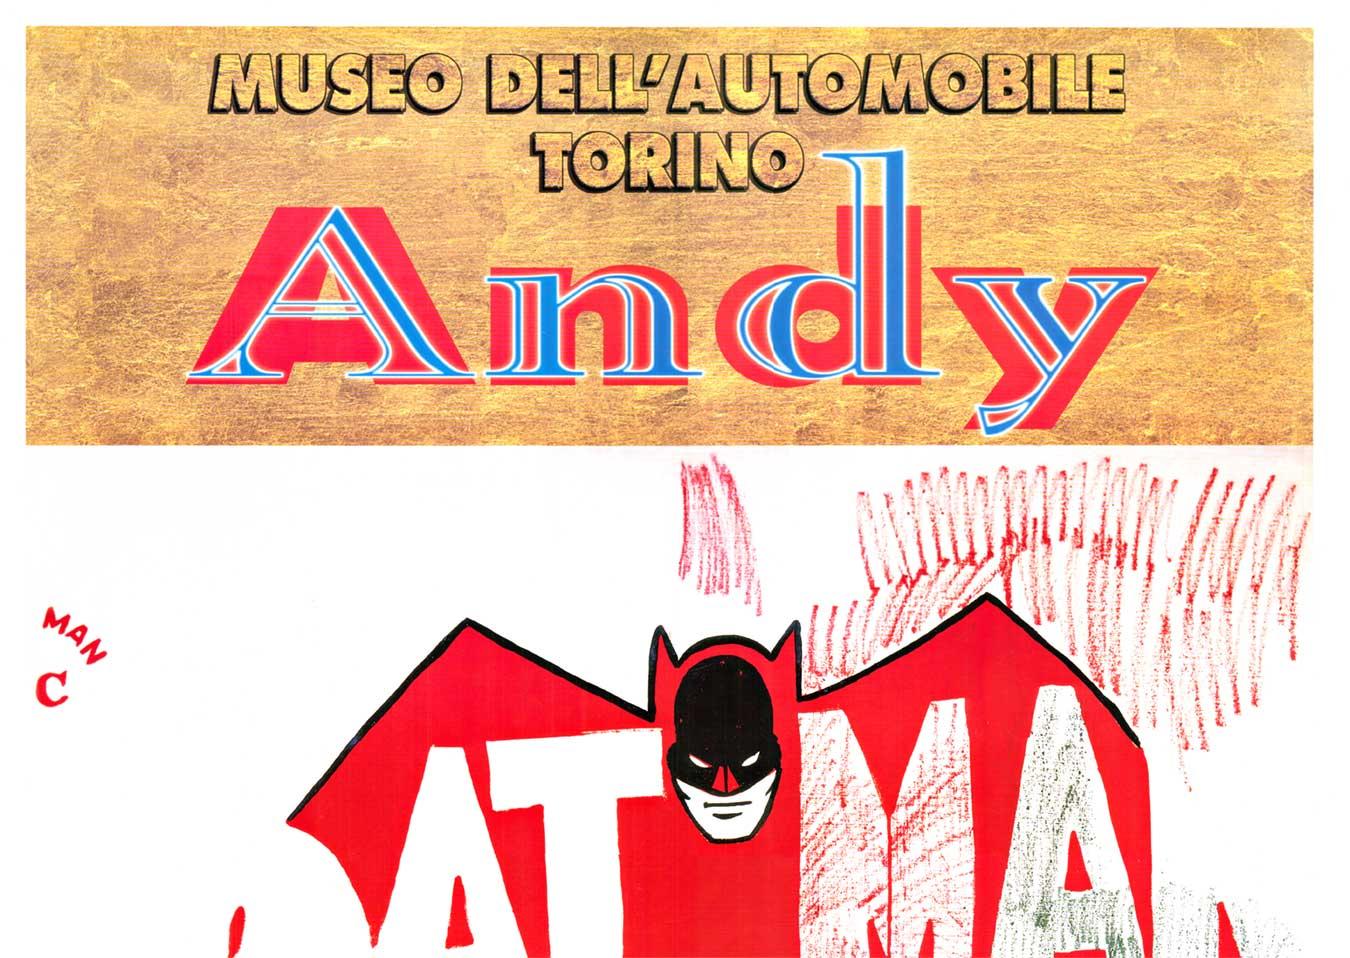 Original Batman Museo Dell'Automobile Torino vintage Italian poster - Print by (after) Andy Warhol